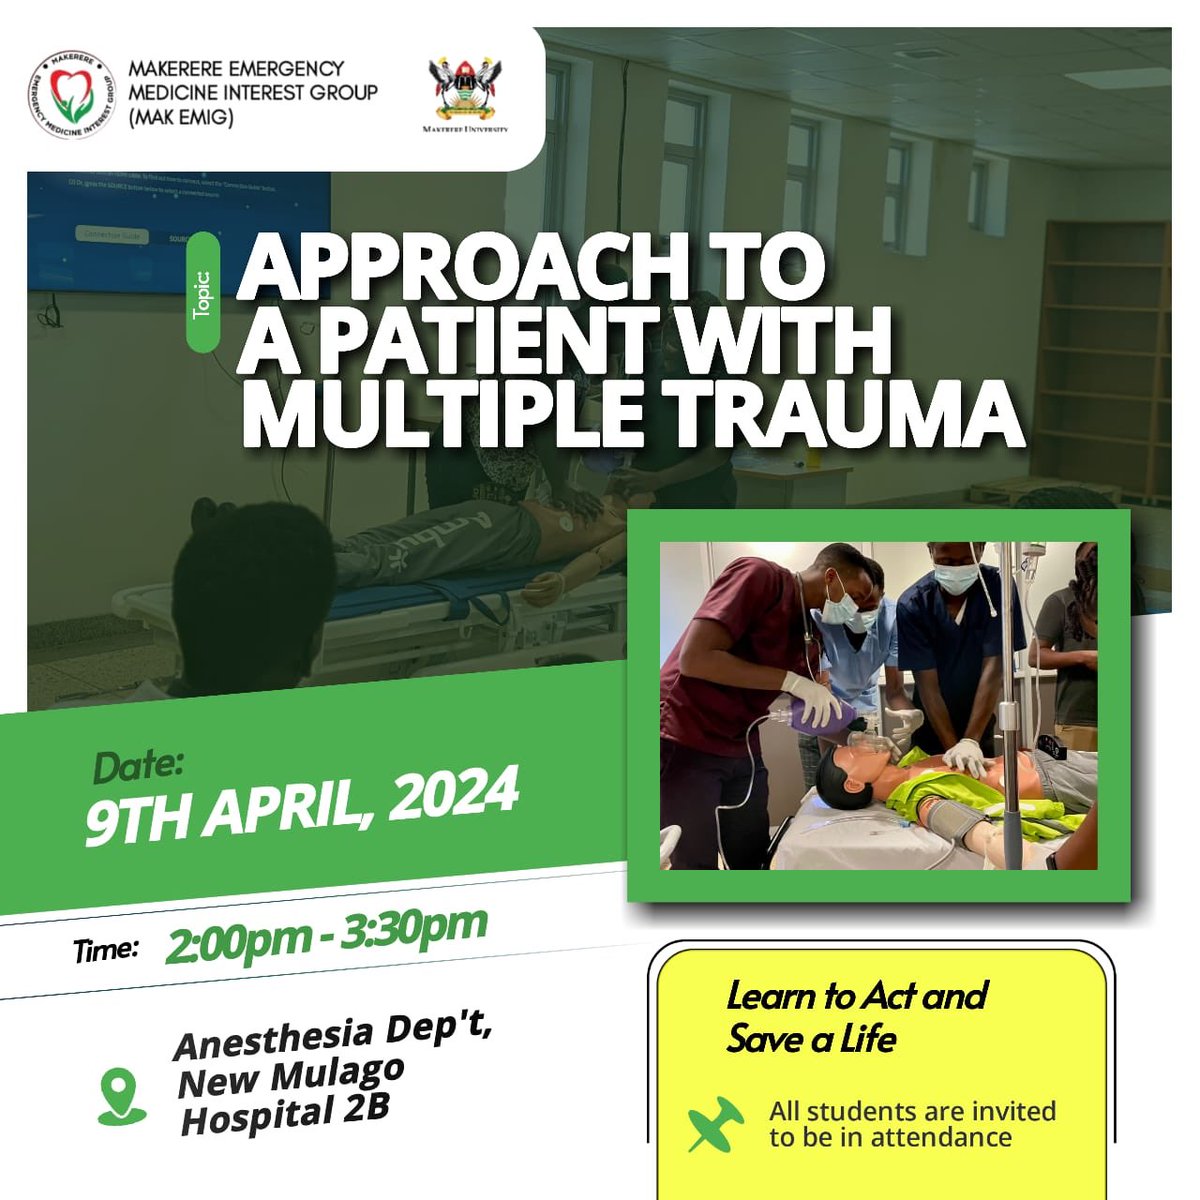 Calling all medical students to join us tomorrow for a hands-on skills session with the @EMInterestMak See you there! #Trauma #Training